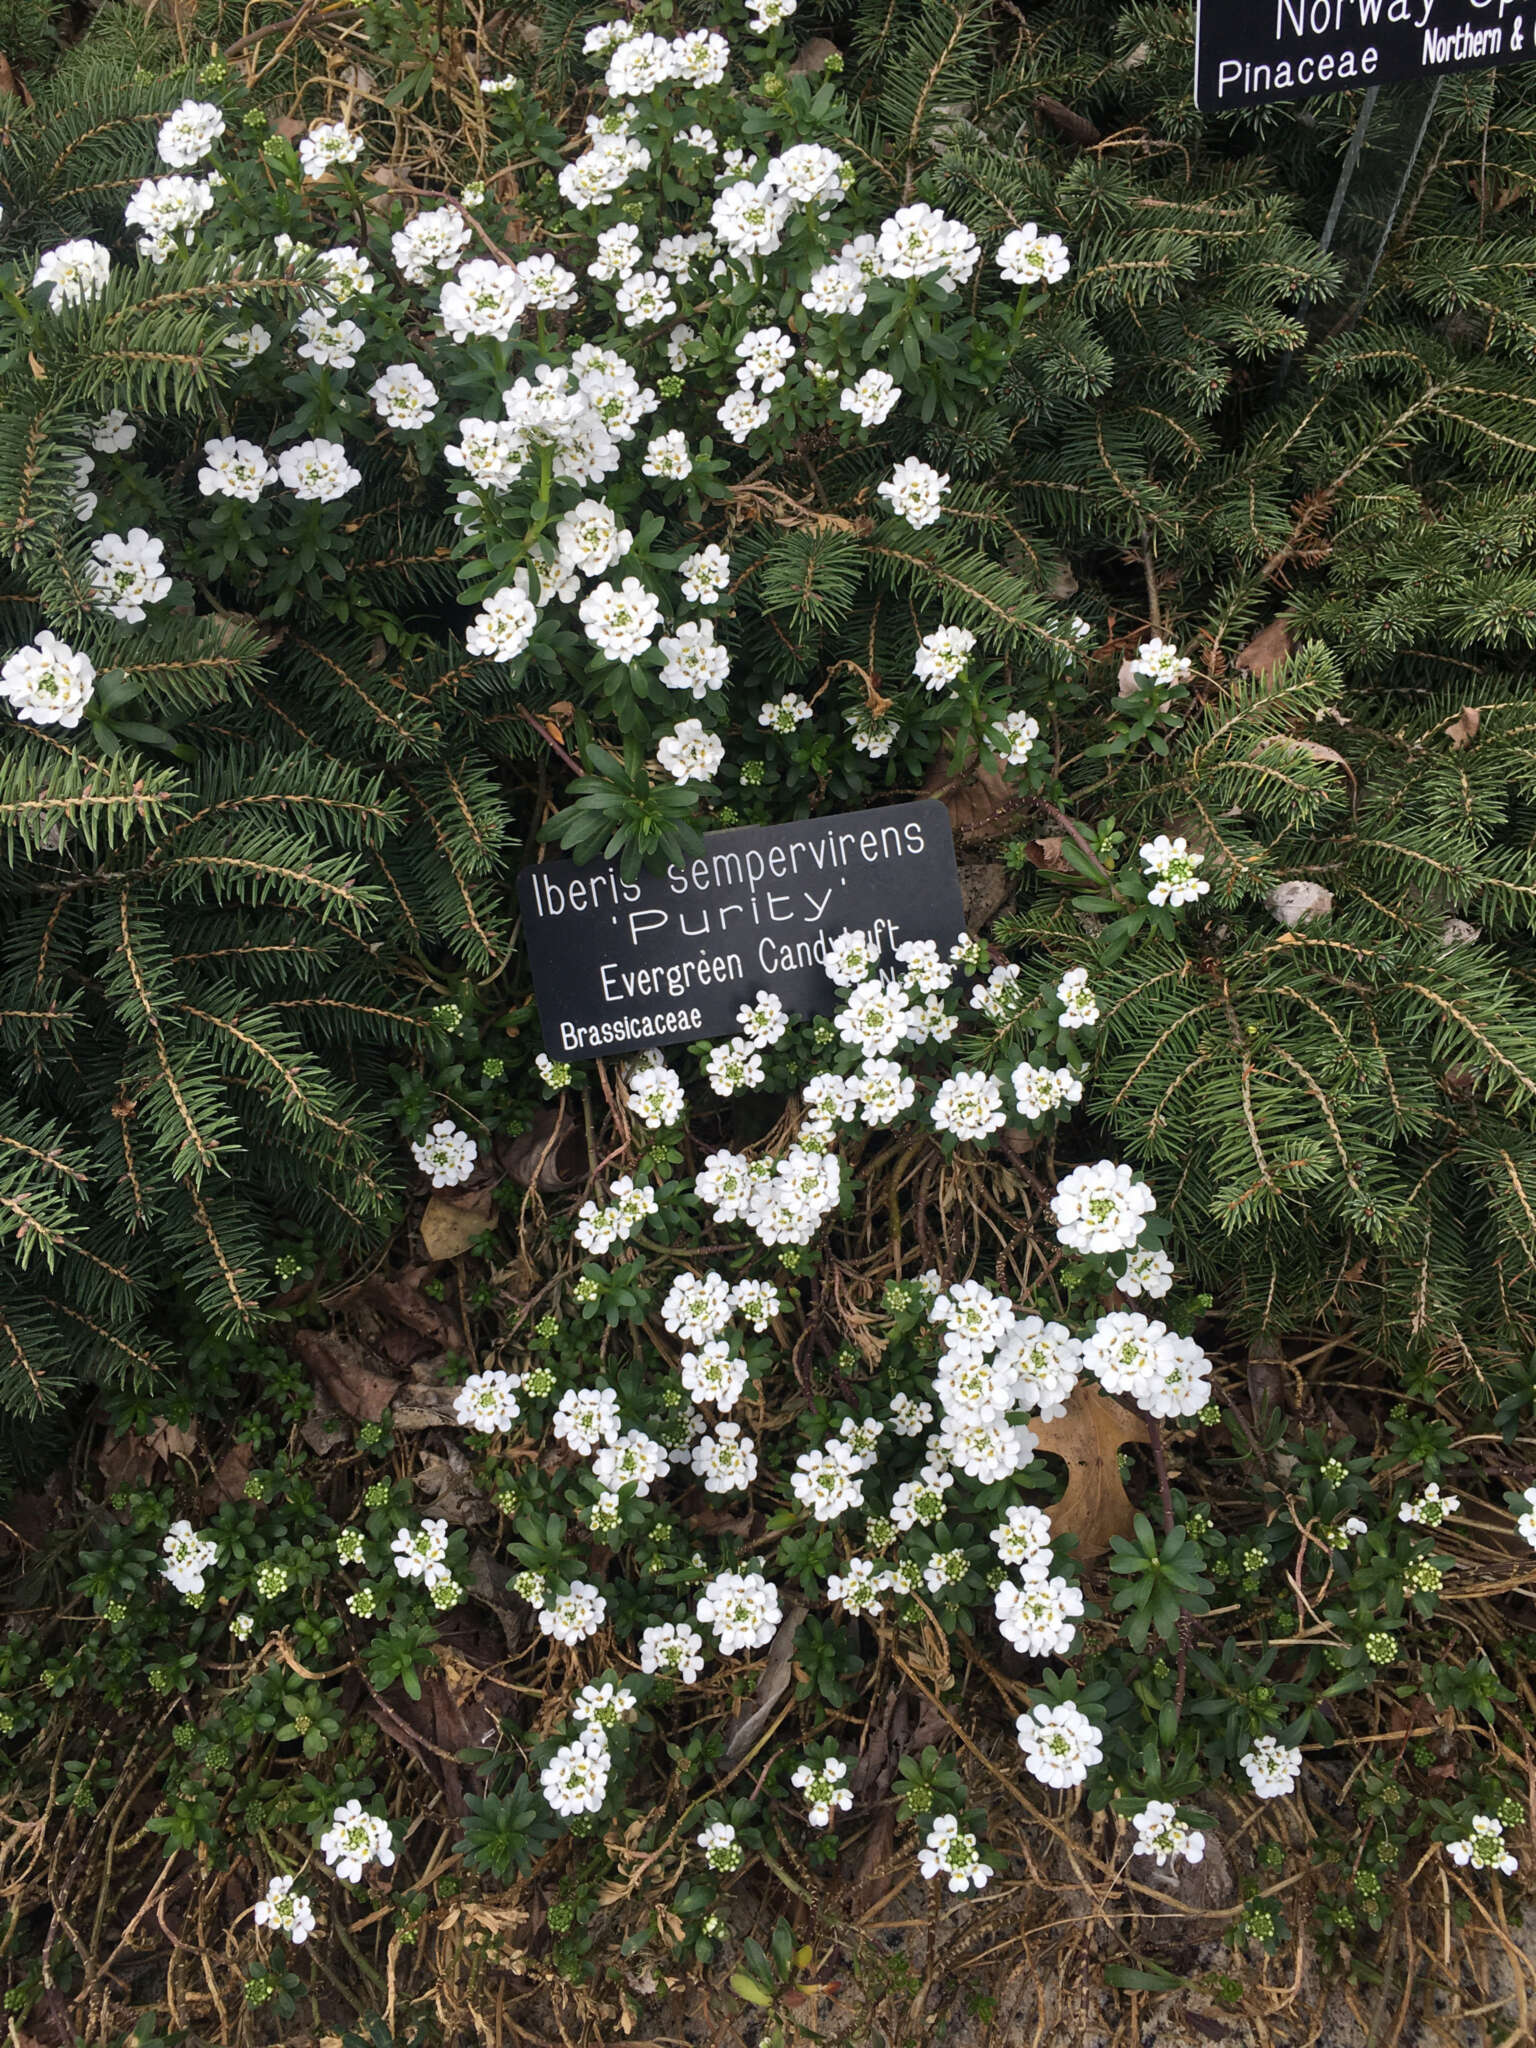 Image of evergreen candytuft